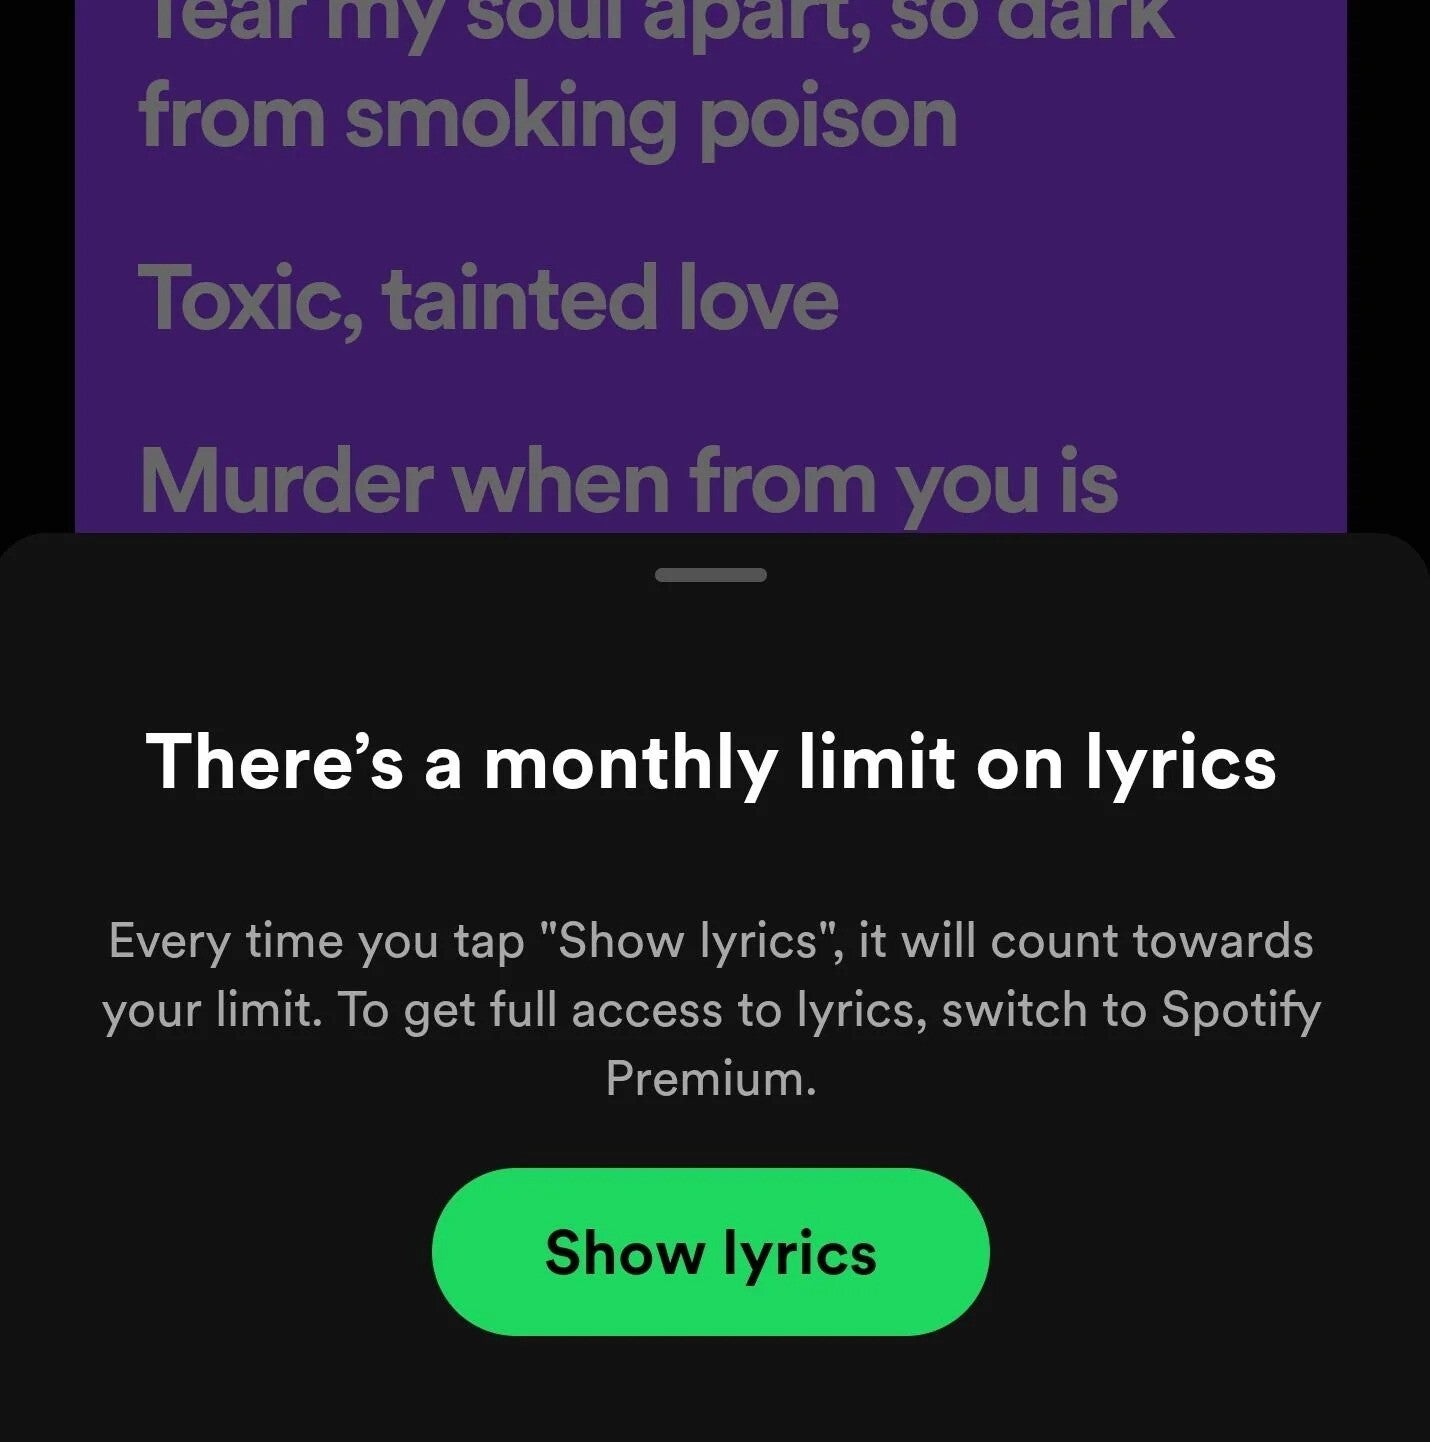 Image Credit- Reddit user superbuza - The end of free singing? Spotify might hide lyrics unless you pay